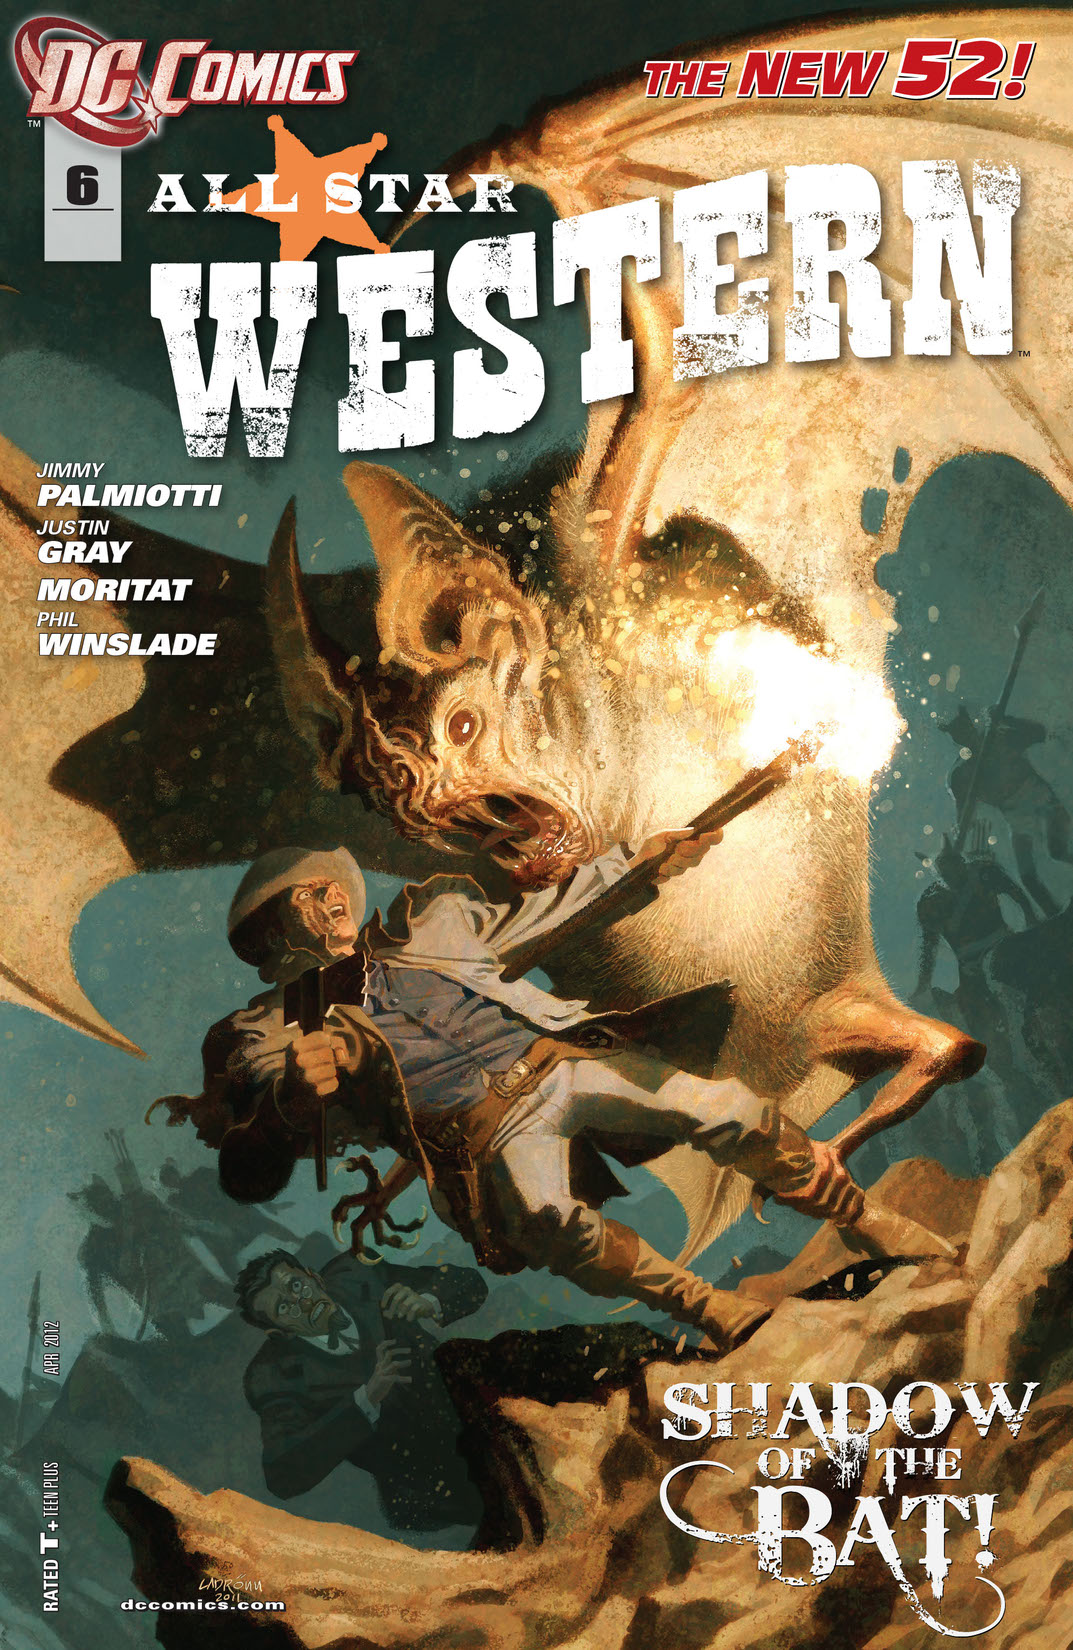 All Star Western #6 preview images